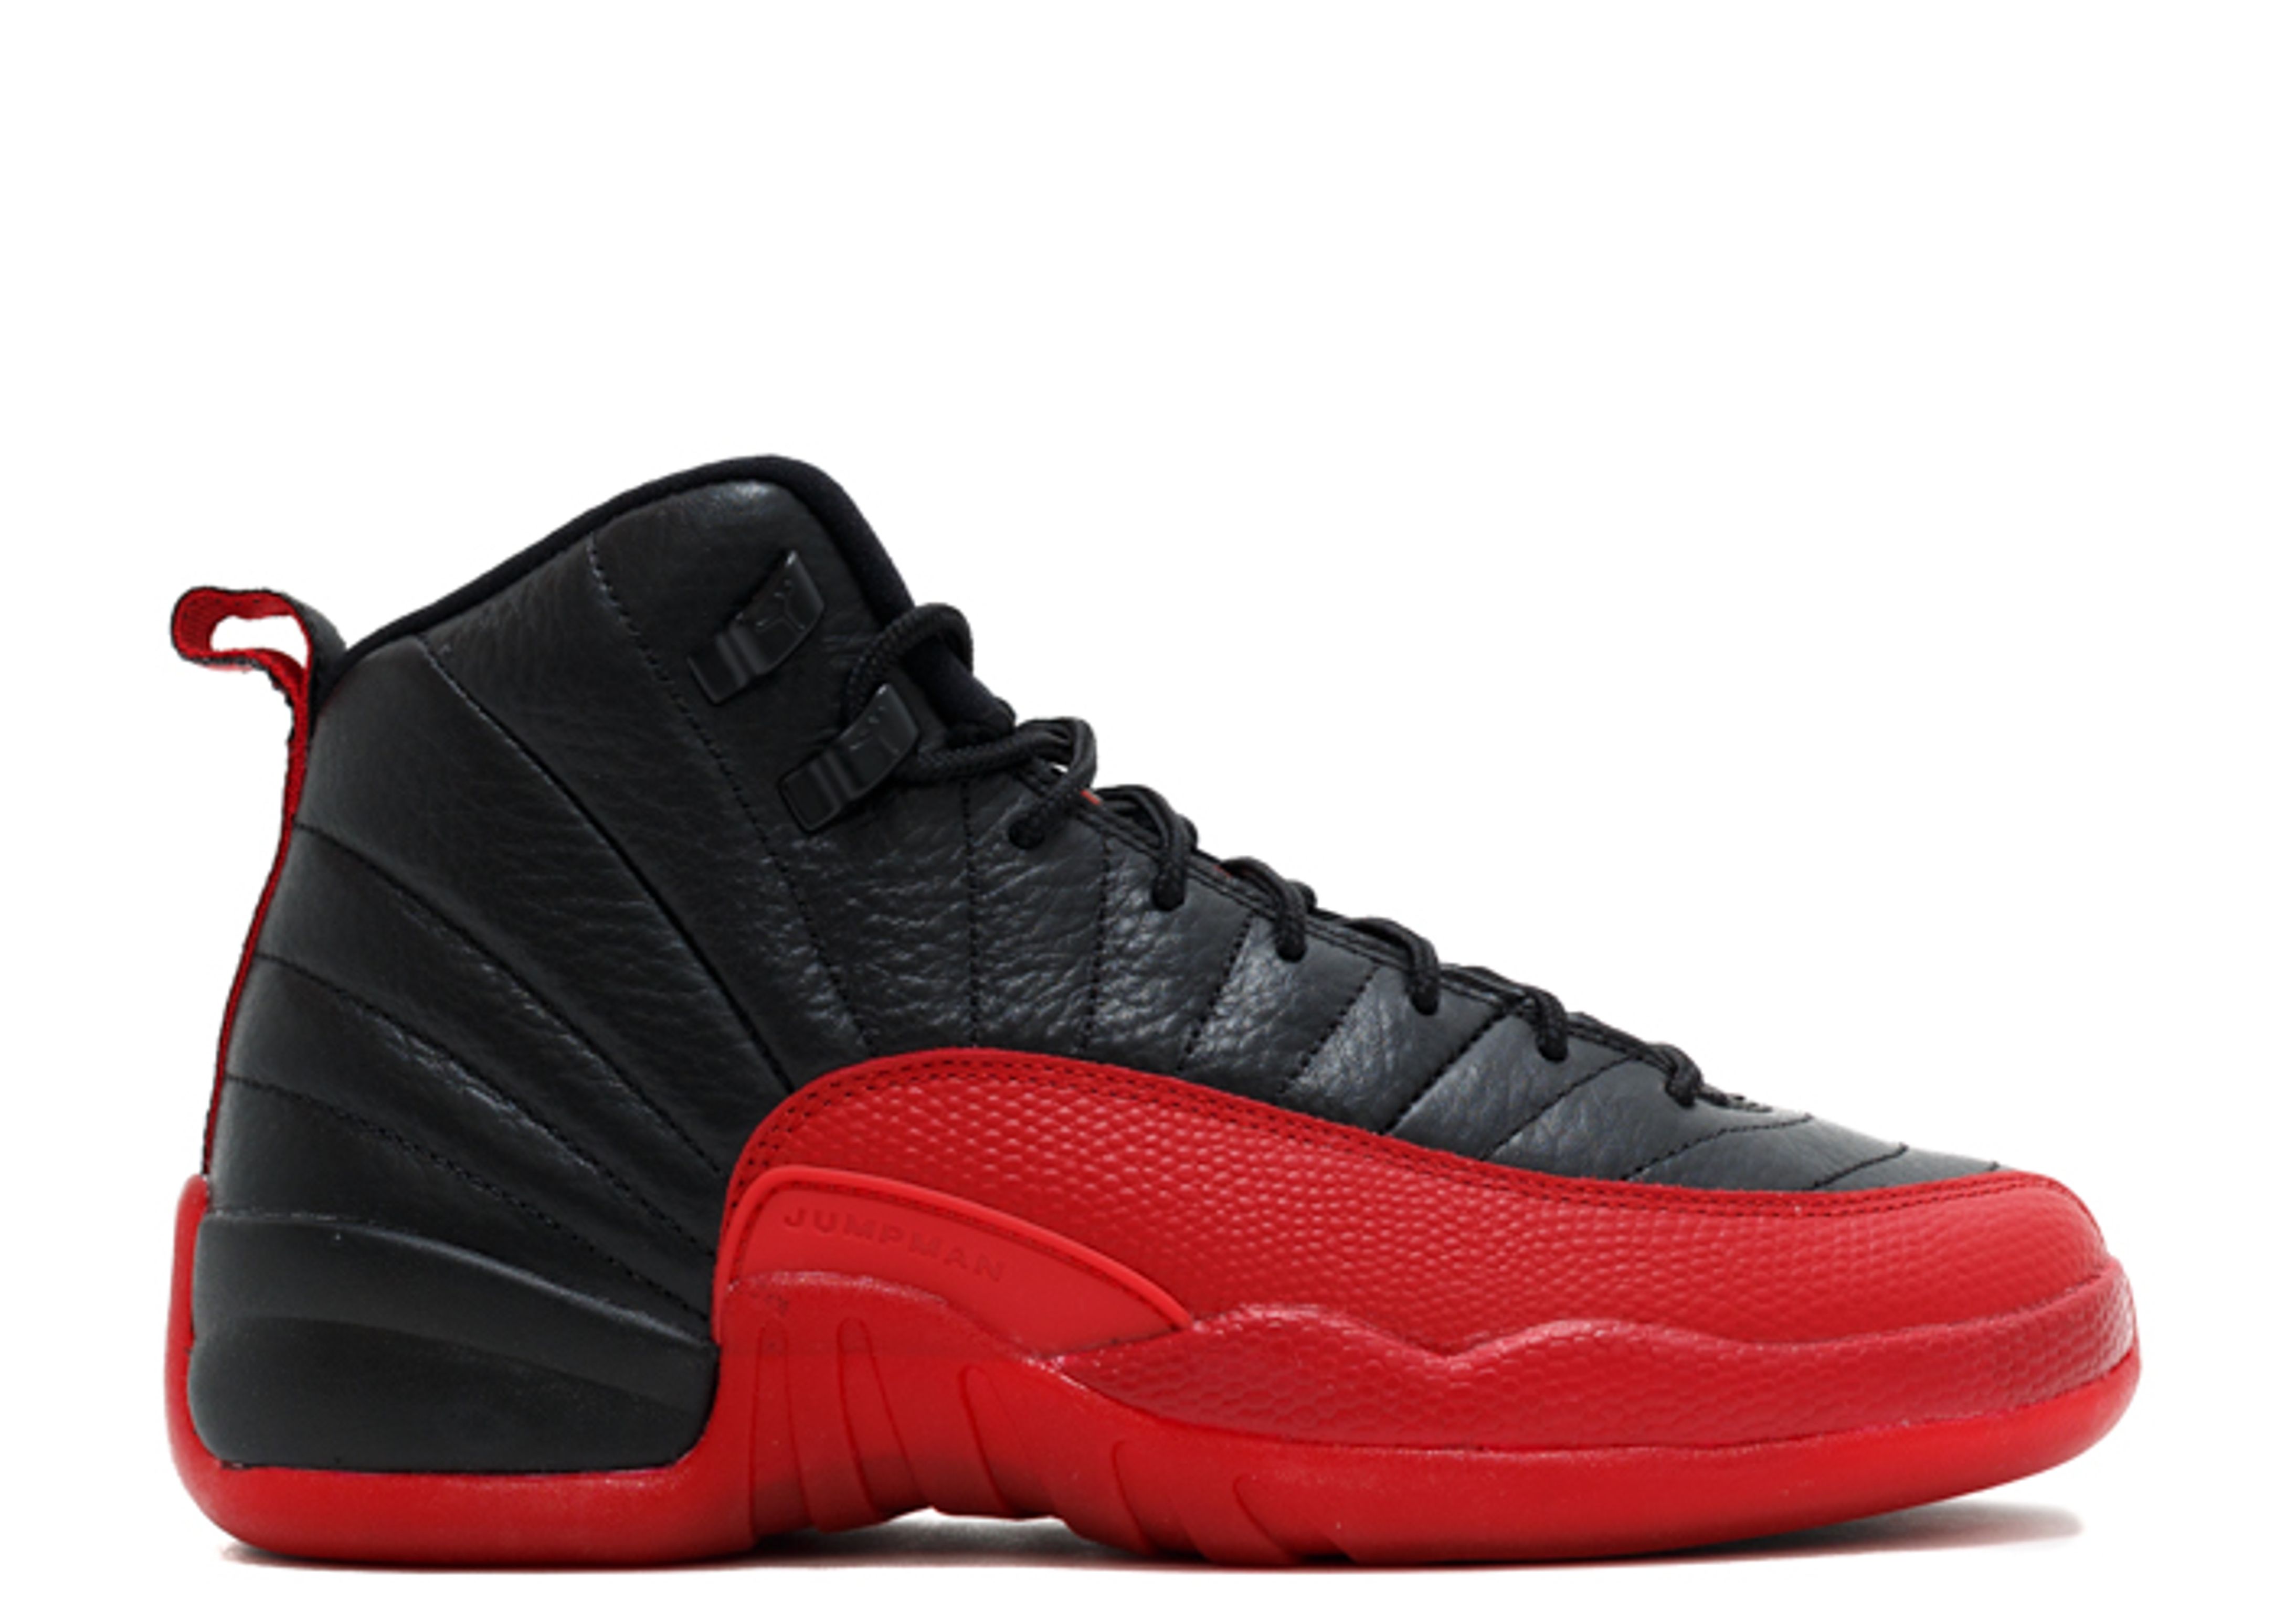 red and black 12 jordans release date